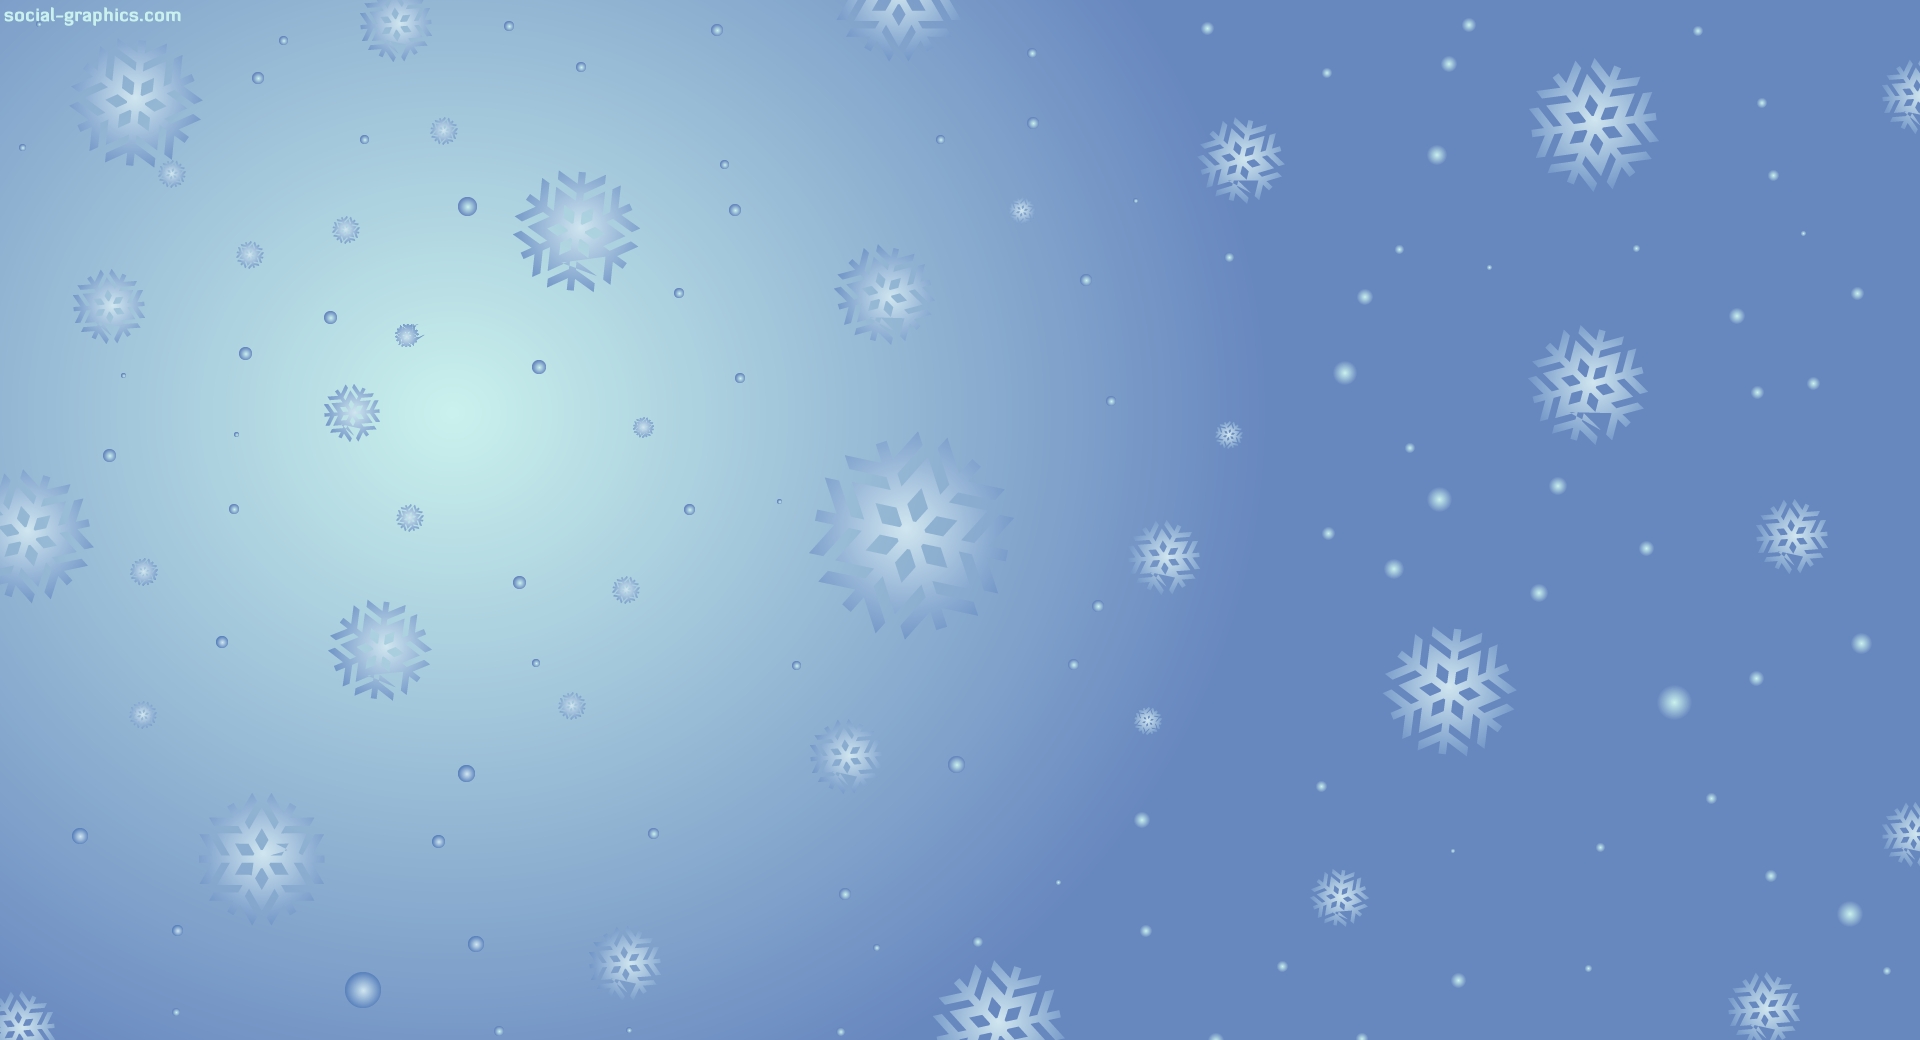 Twitter Background Snowy Winter Social Media Graphics